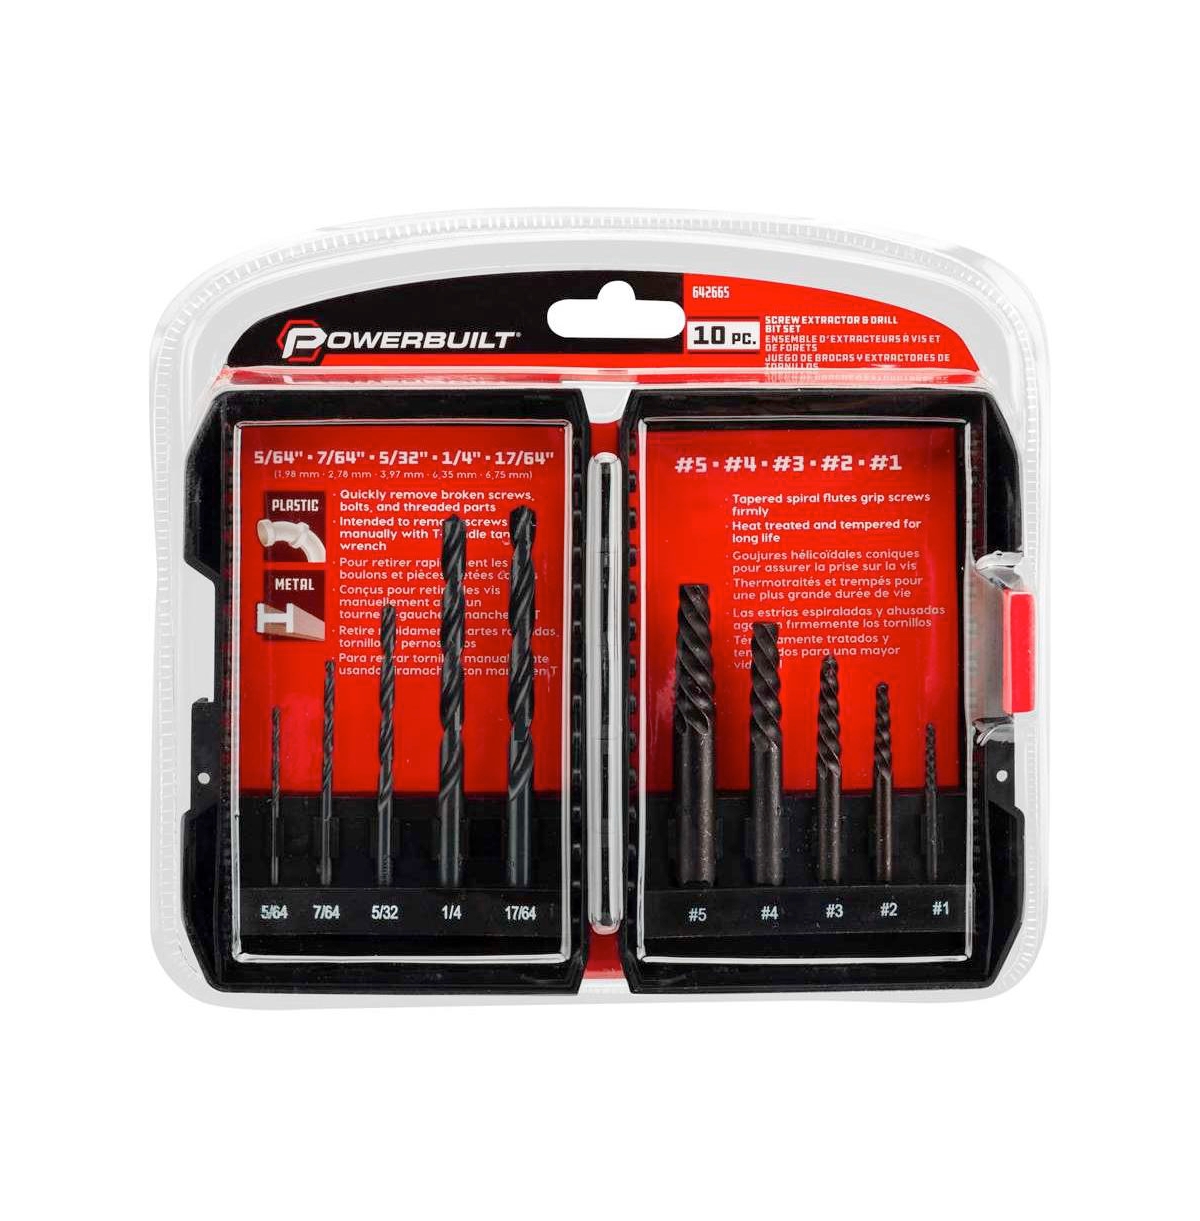 10 Piece Drill and Screw Extractor Set - Black